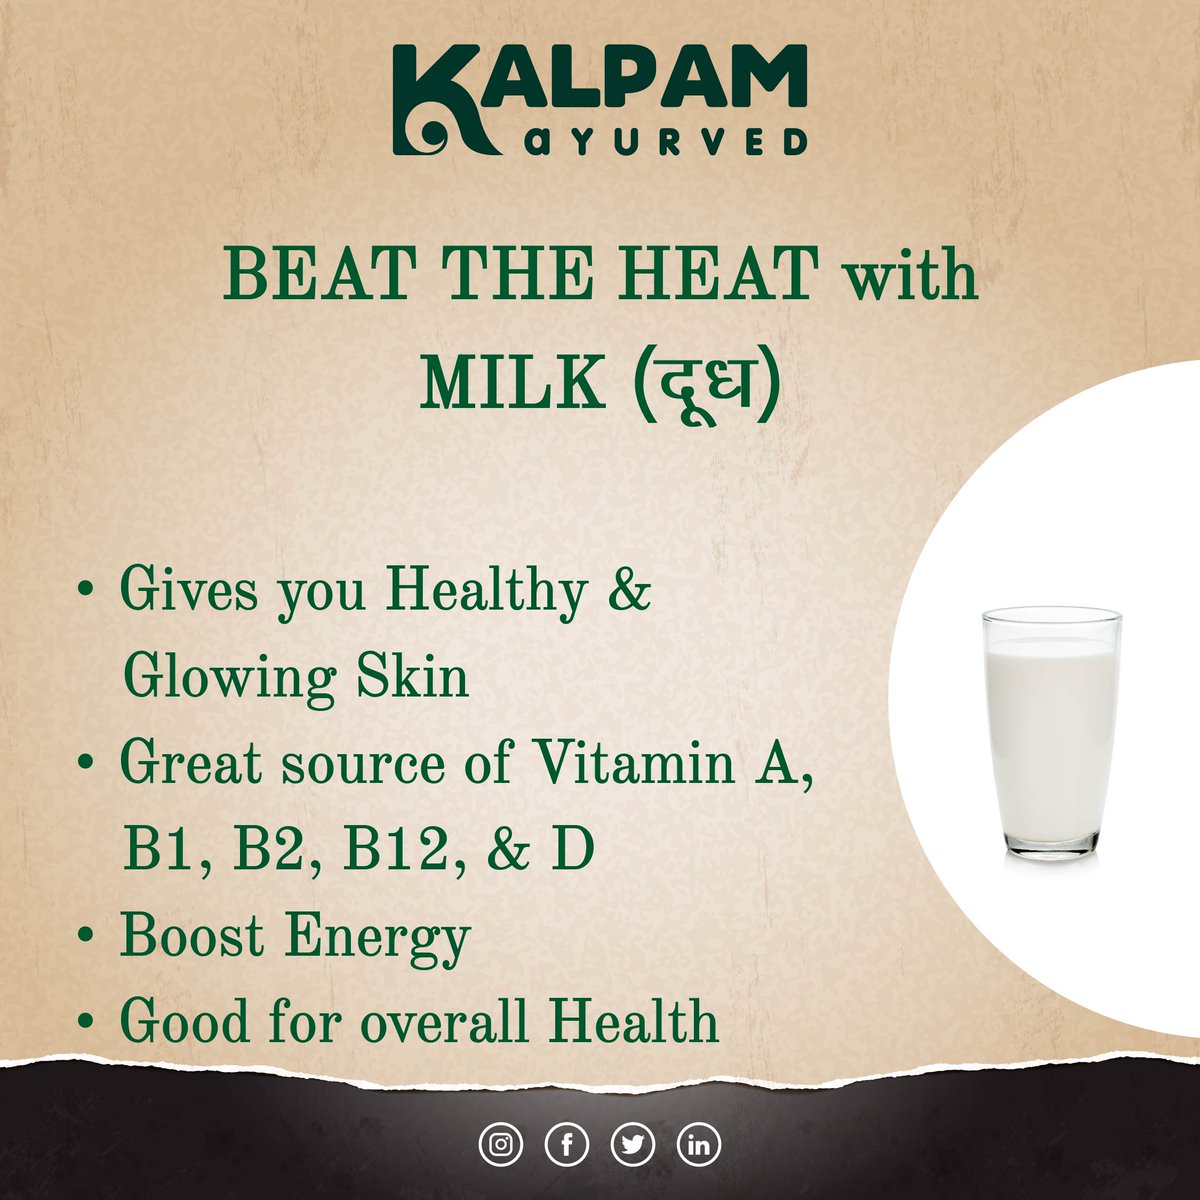 Beat the Heat with Milk (दूध)
.
.
.
#kalpamayurved #glowingskin #milk #Vitamins #milkbenefits 
.
.
.
‼️𝐂𝐨𝐩𝐲𝐫𝐢𝐠𝐡𝐭 𝐃𝐢𝐬𝐜𝐥𝐚𝐢𝐦𝐞𝐫‼️
All information on this page is for awareness purpose only. (𝐍𝐎 𝐂𝐎𝐏𝐘𝐑𝐈𝐆𝐇𝐓 𝐈𝐍𝐅𝐑𝐈𝐍𝐆𝐄𝐌𝐄𝐍𝐓 𝐈𝐍𝐓𝐄𝐍𝐃𝐄𝐃)